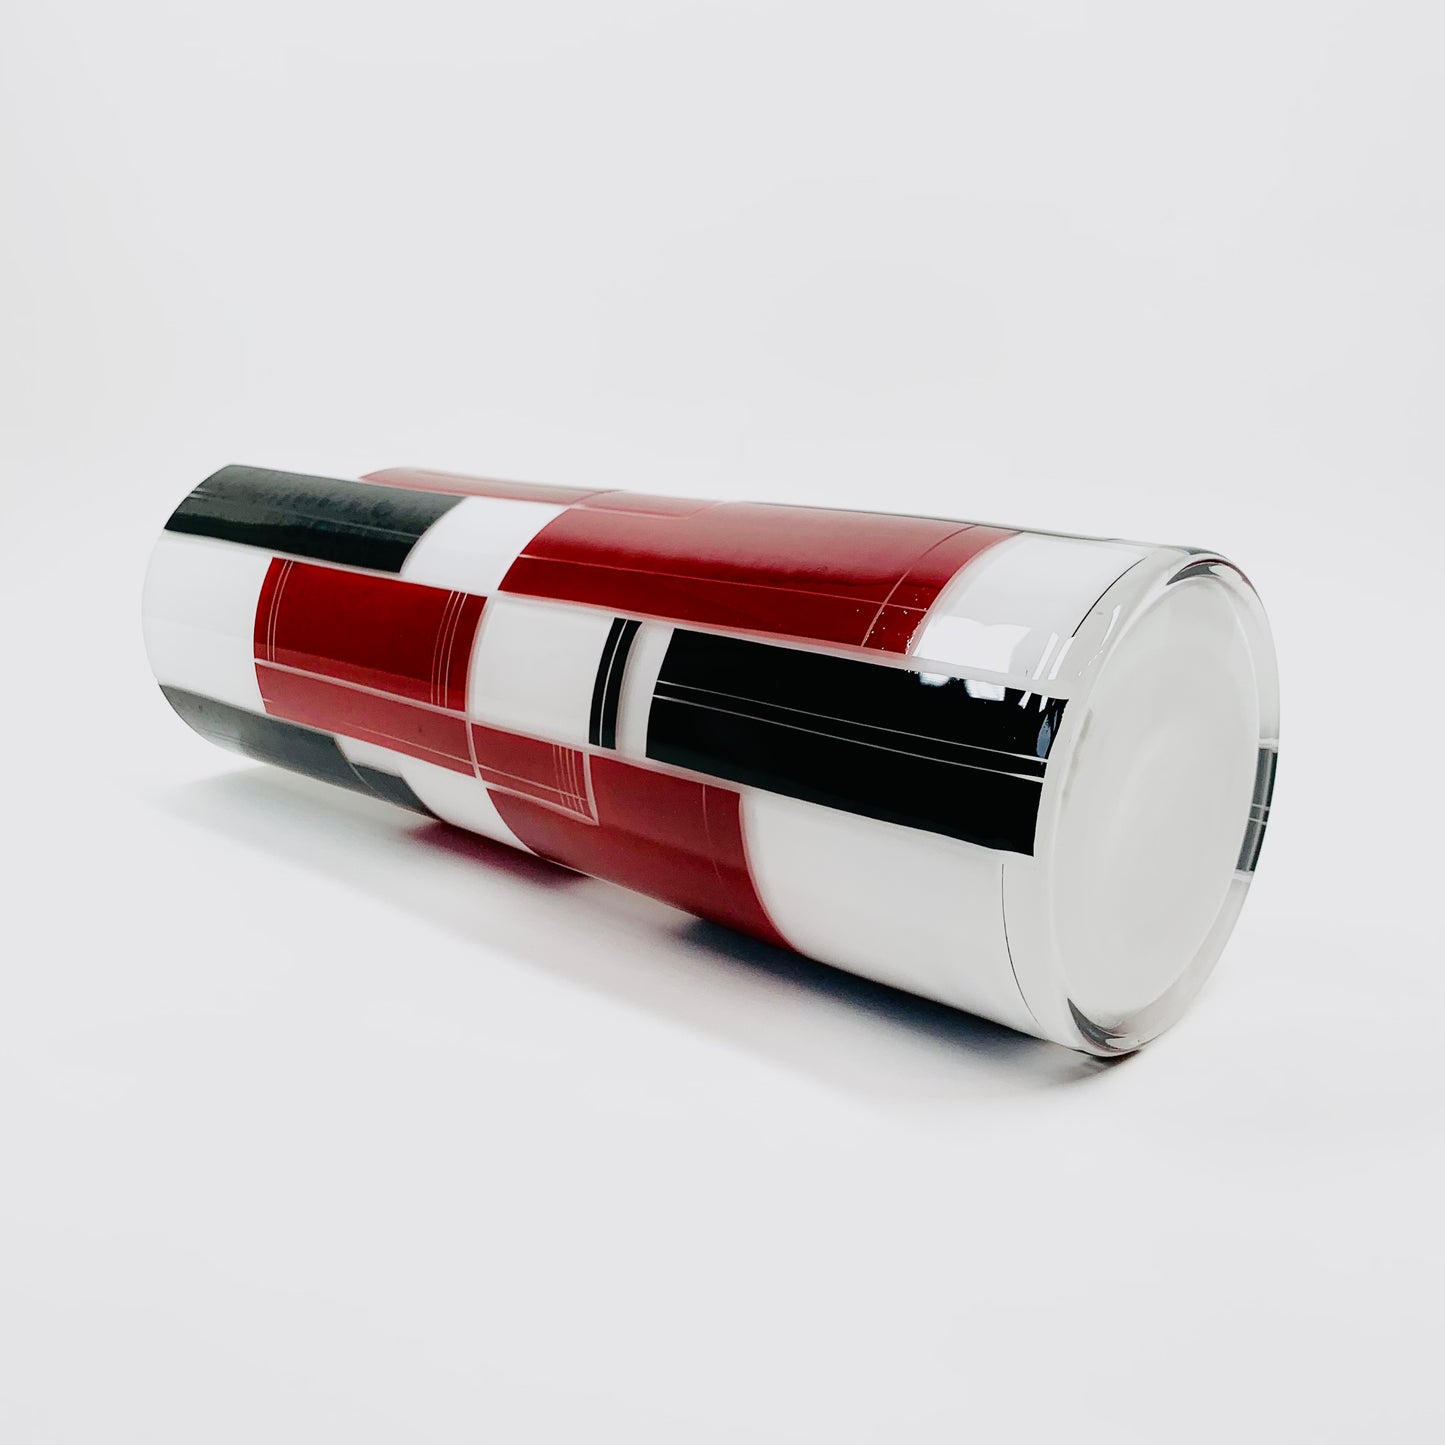 Extremely rare 1940s Baus Haus cased white black and ruby enamel cylinder glass vase by Karl Palda